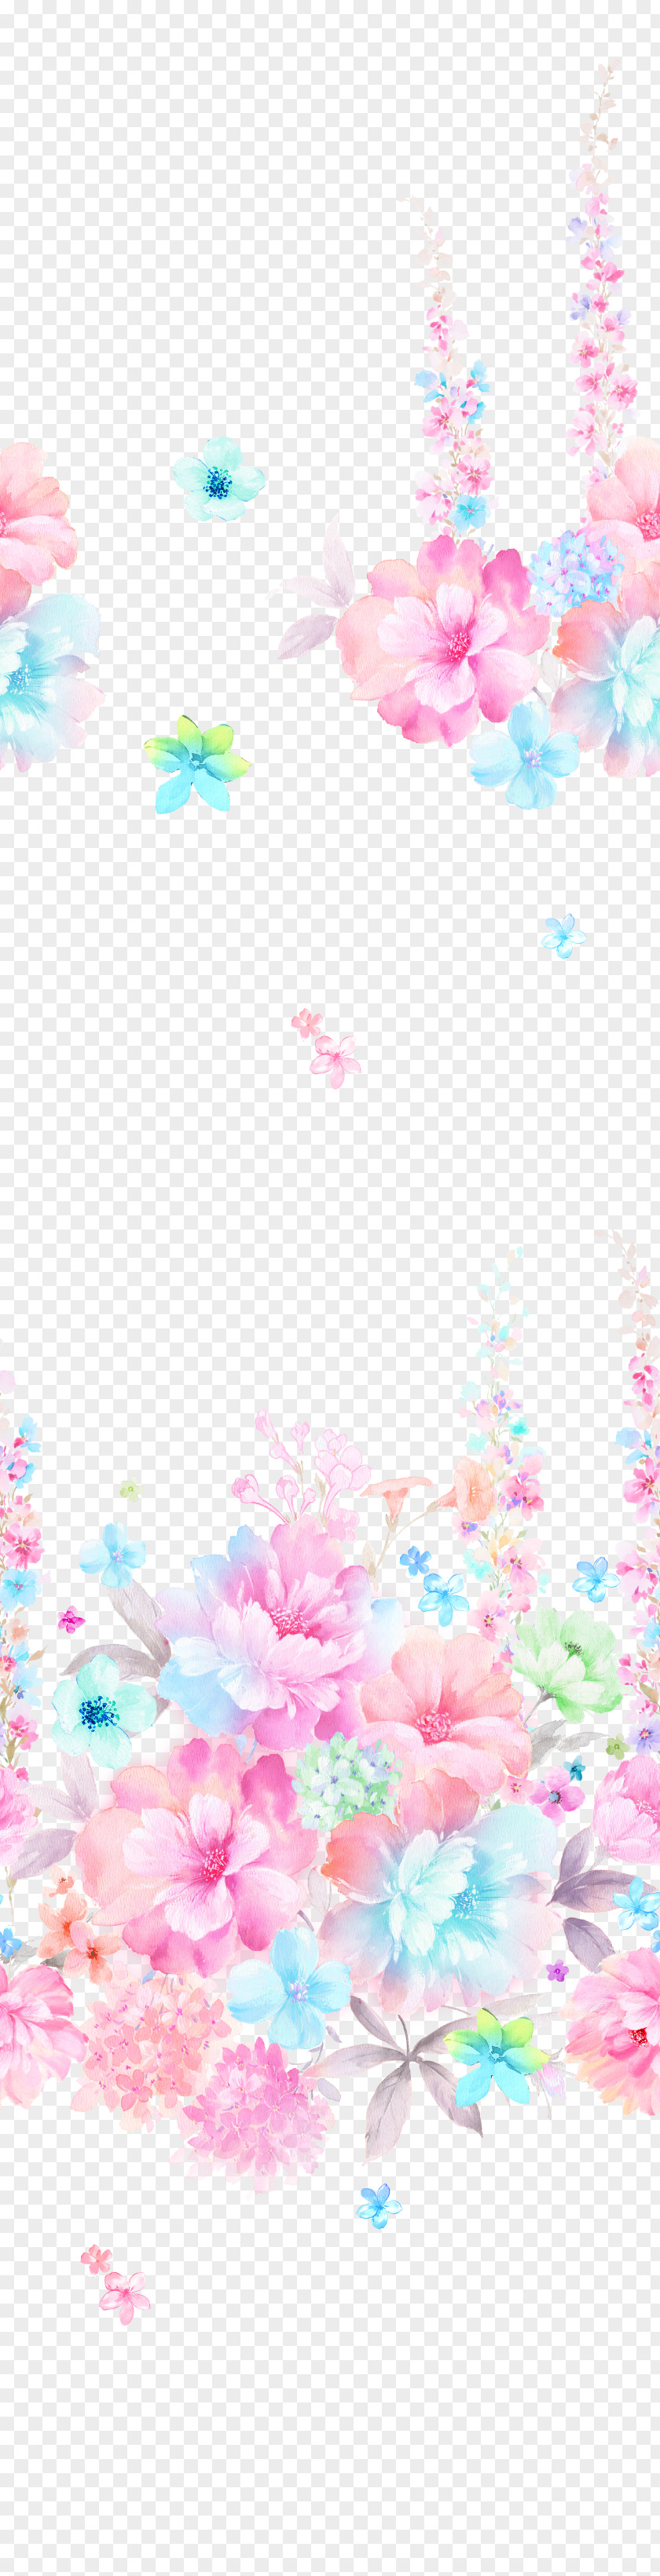 Watercolor Flowers Painting Graphic Design PNG